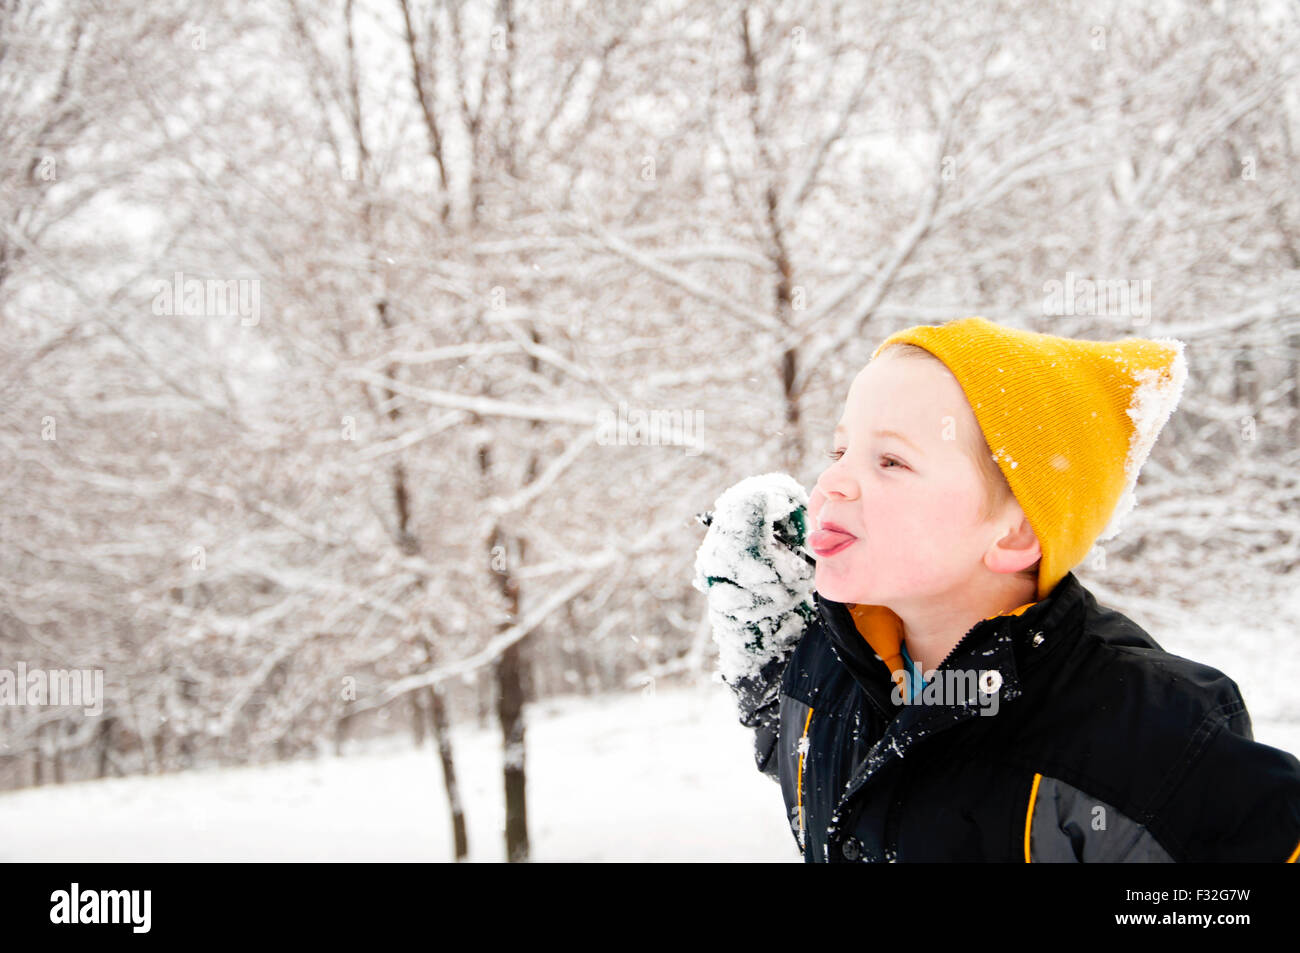 Boy sticking out tongue winter landscape Stock Photo